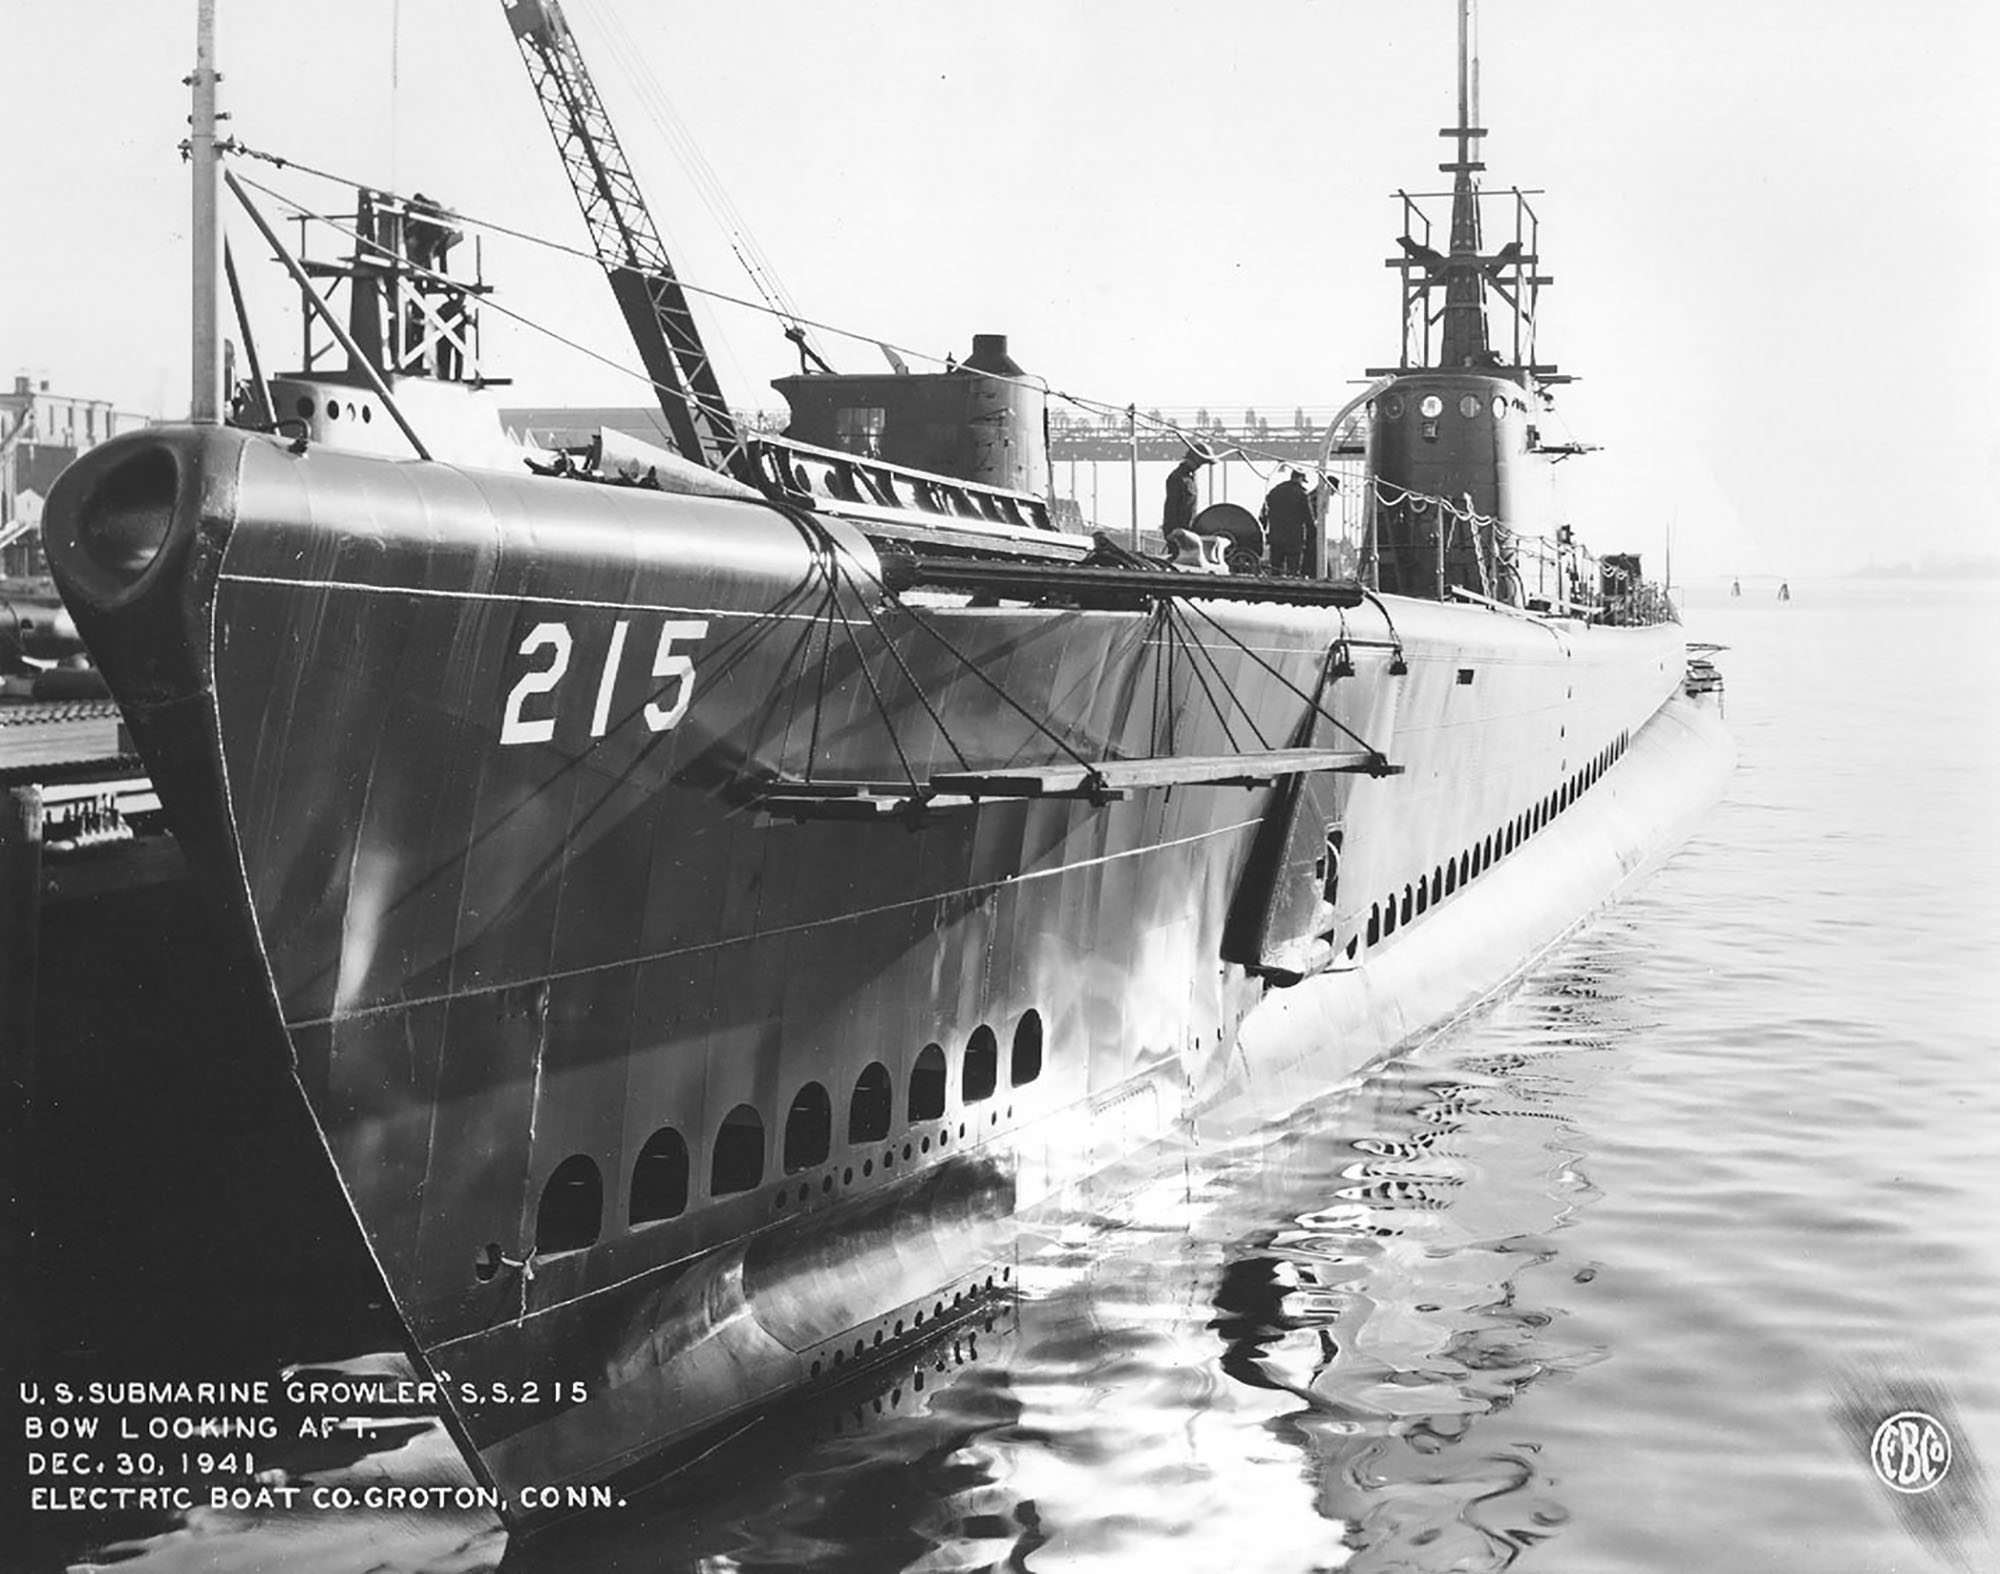 Submarine Growler at the fitting out piers at the Electric Boat Company, Groton, Connecticut, United States, 30 Dec 1941. Note Growler’s extended mine cutting gear above the suspended wooden planks.